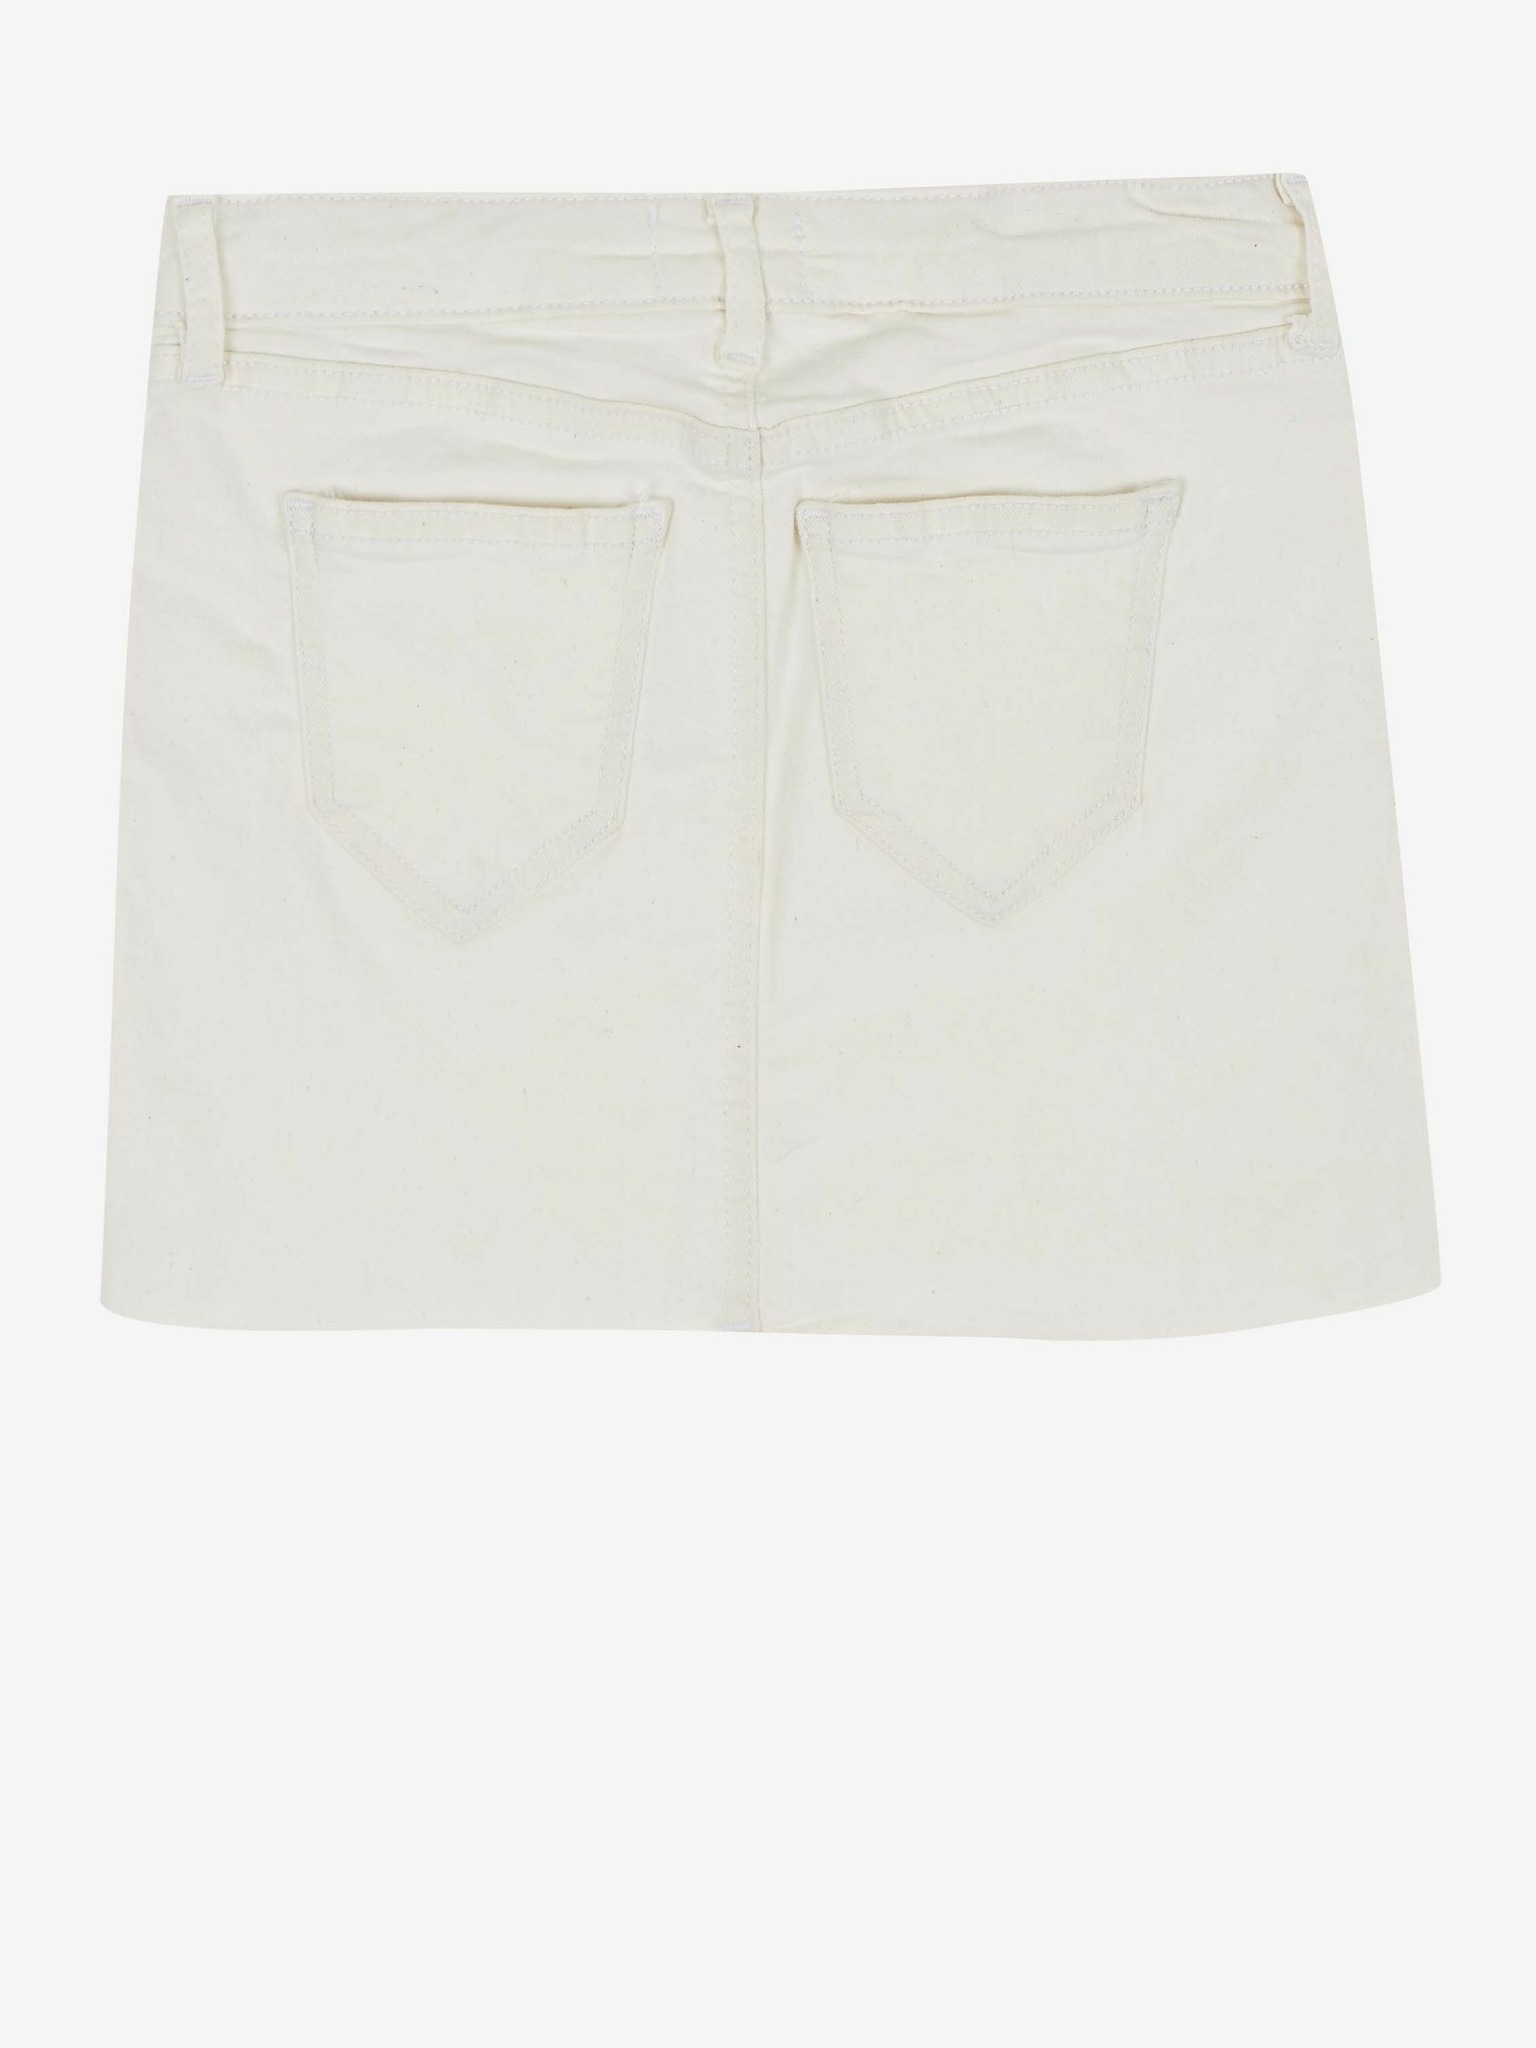 Buy Fayon Kids Off White Top with Denim Skirt (Set of 2) online